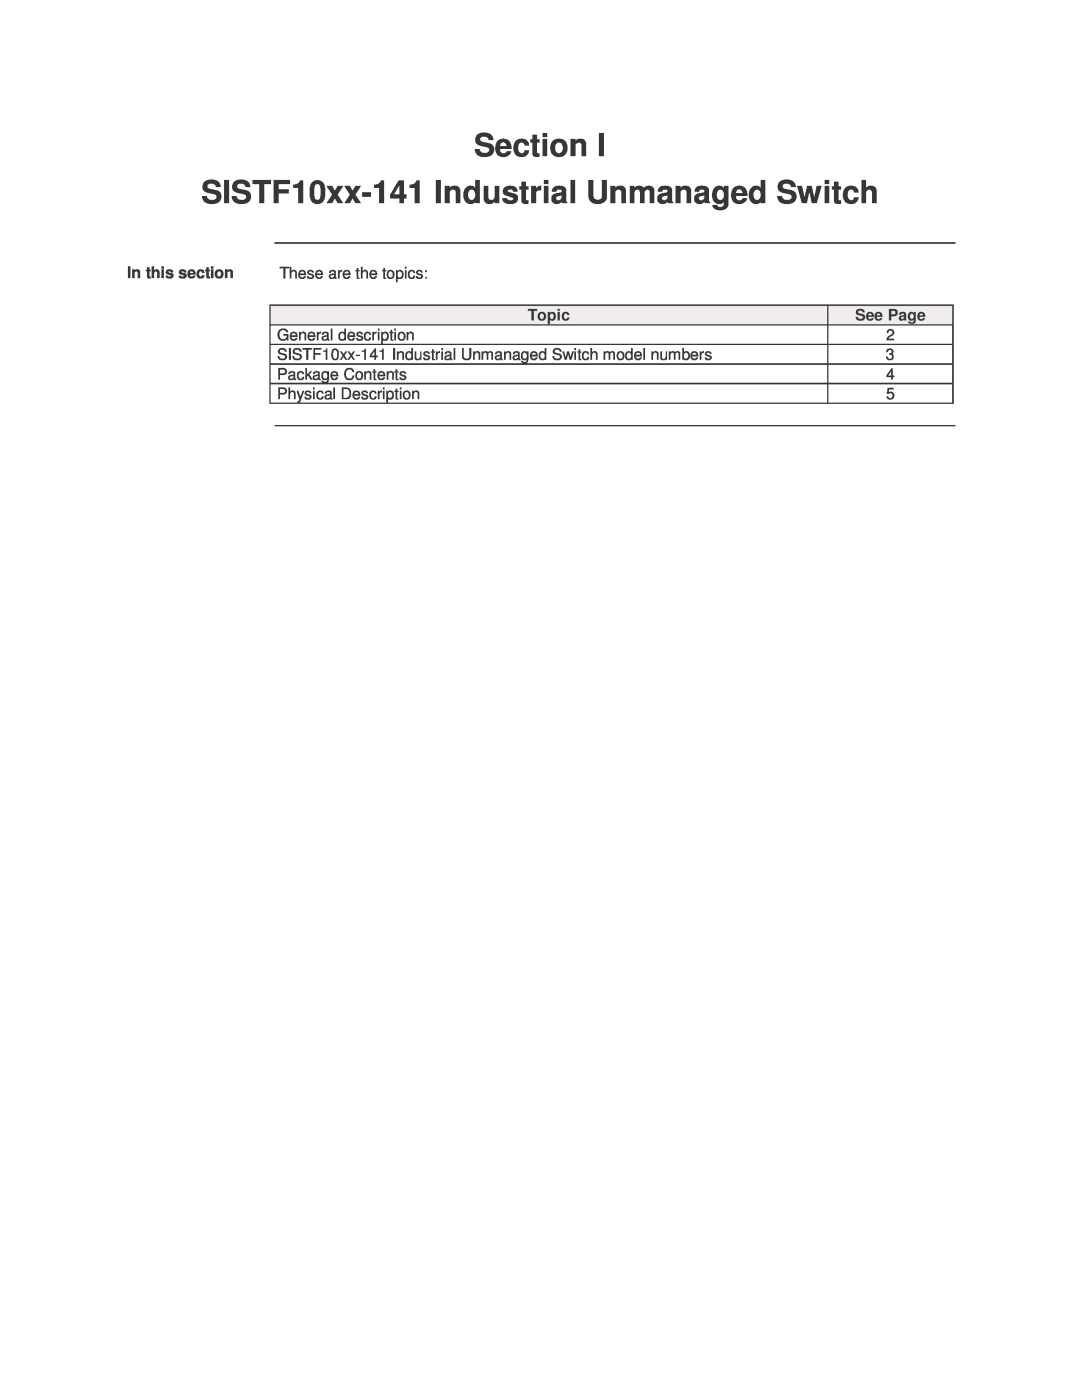 Transition Networks SISTF10xx-141-LR(T) installation manual Section SISTF10xx-141Industrial Unmanaged Switch 